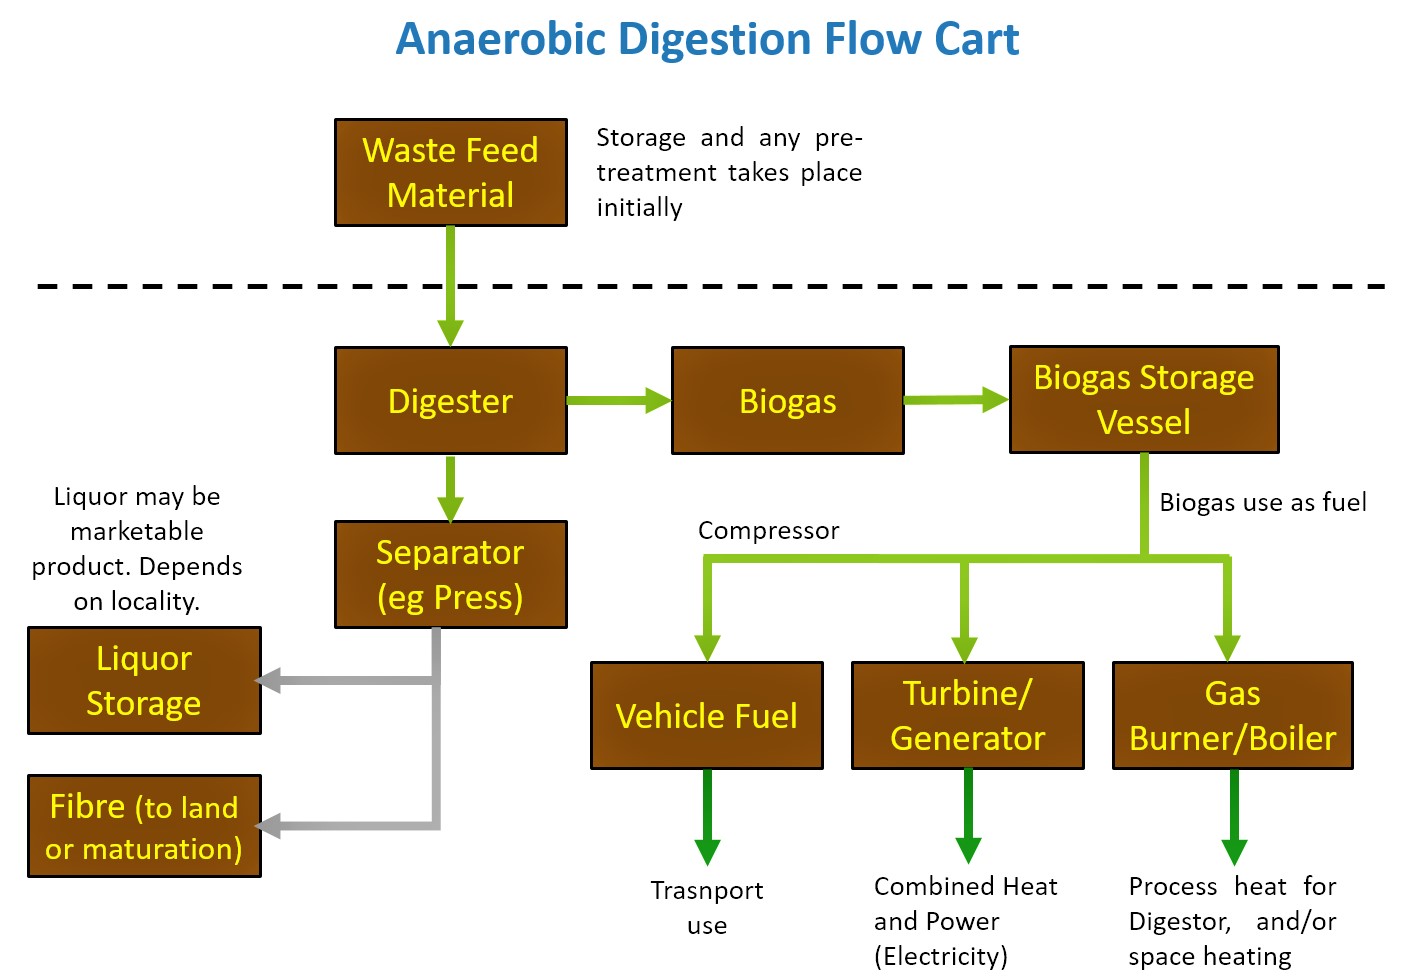 Anaerobic digestion as a means to produce green energy and fertiliser. Source: ANAEROBIC-DIGESTION (2010)